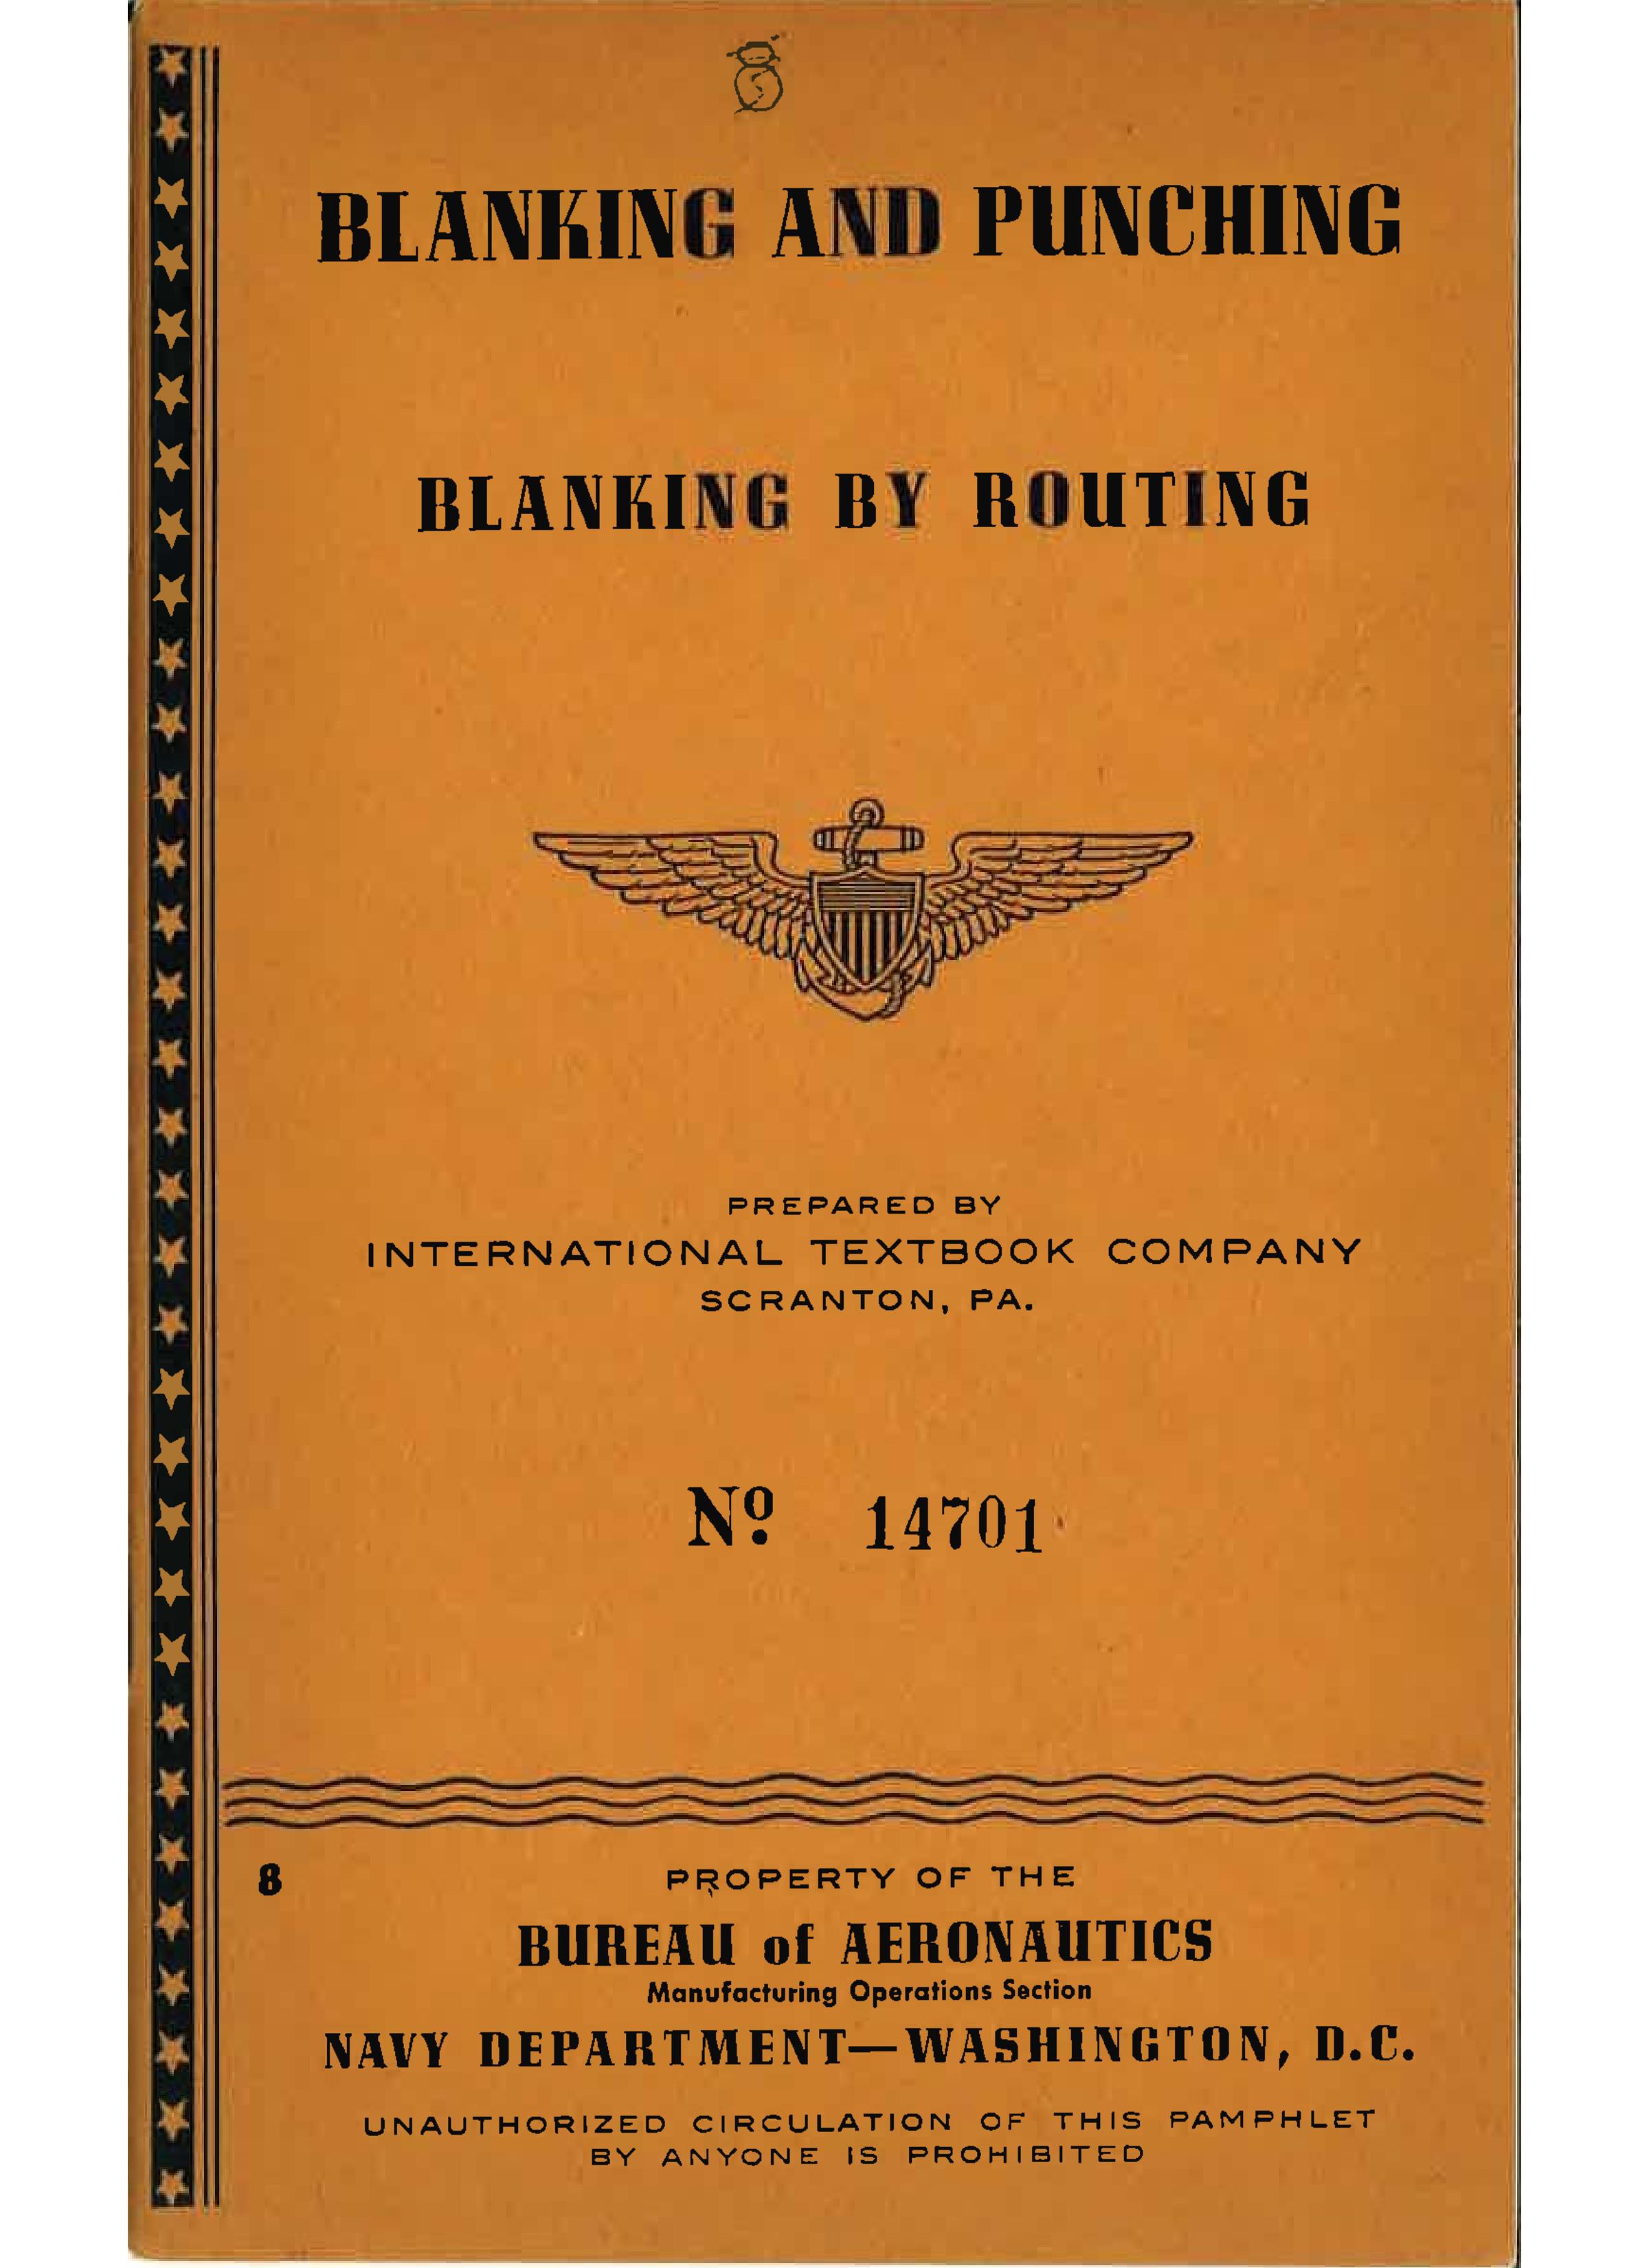 Sample page 1 from AirCorps Library document: Blanking and Punching - Blanking by Routing - Bureau of Aeronautics